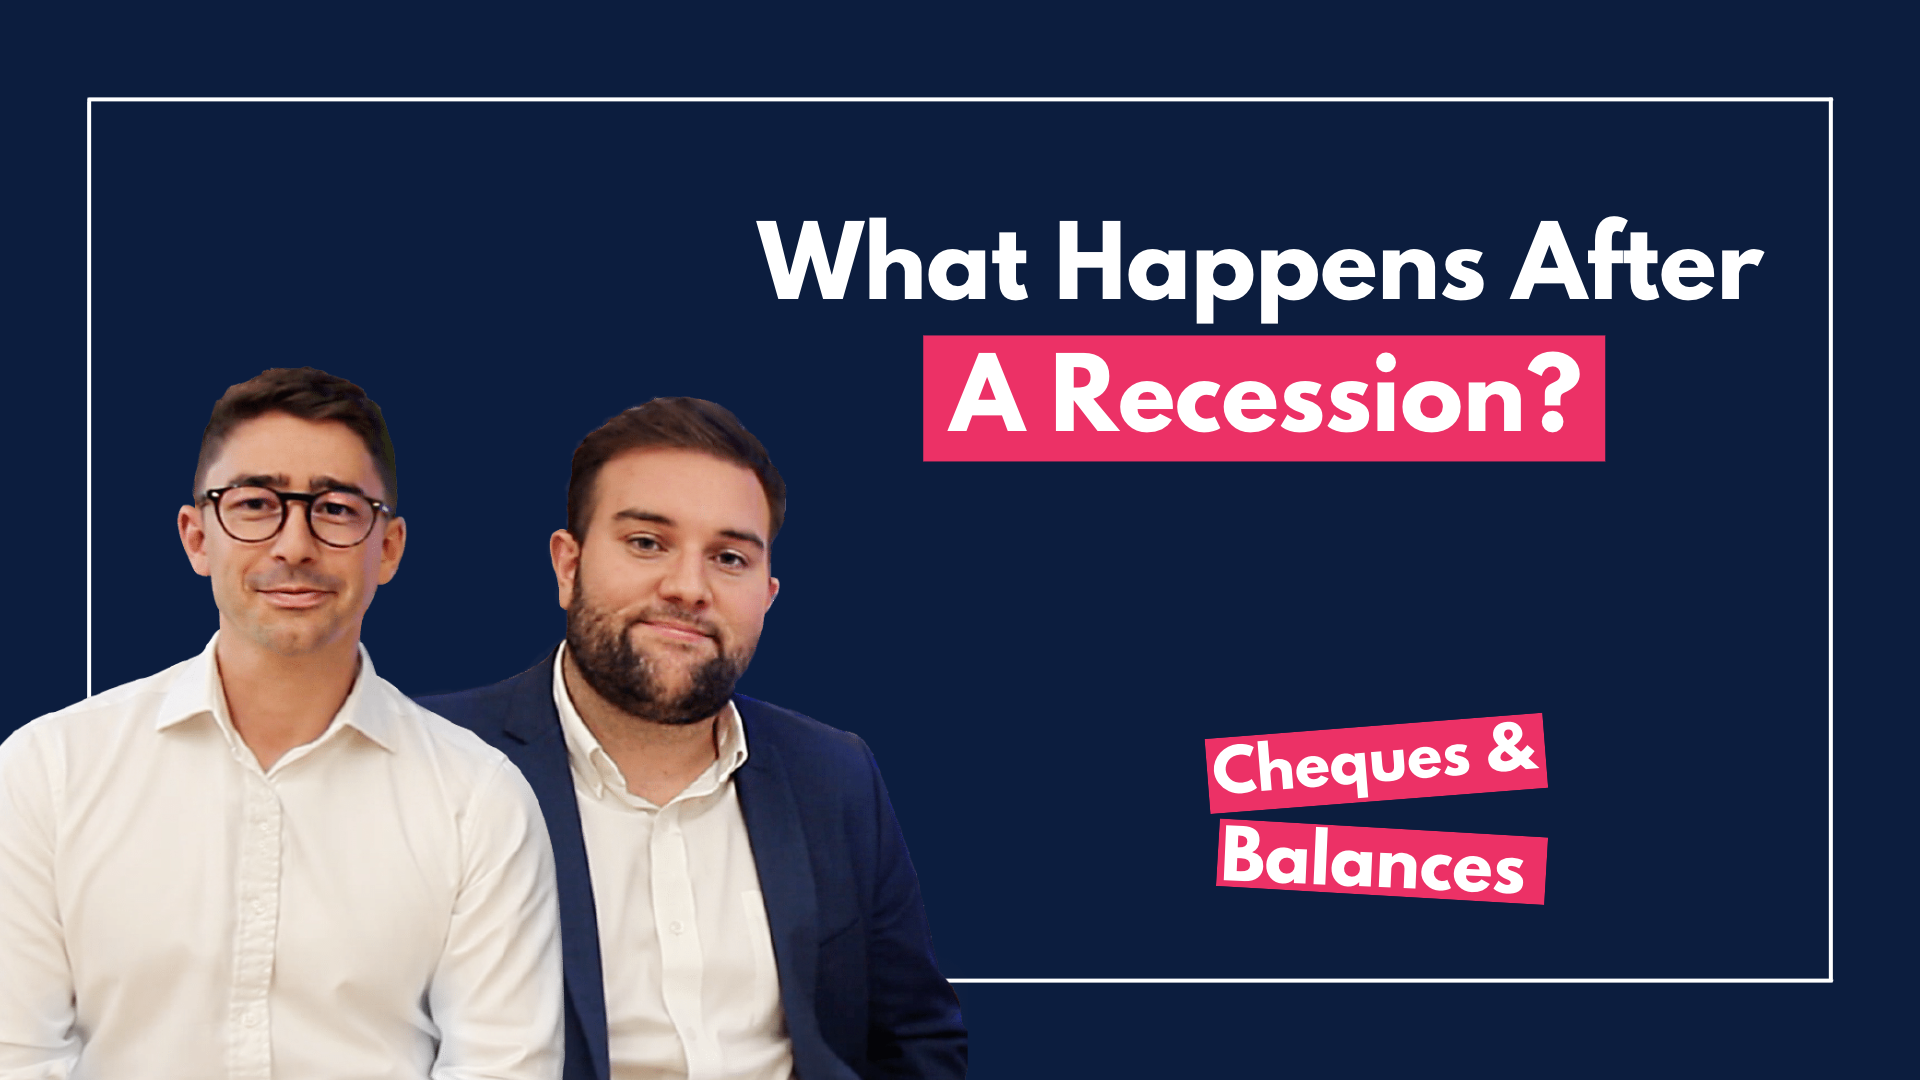 What Happens After A Recession?